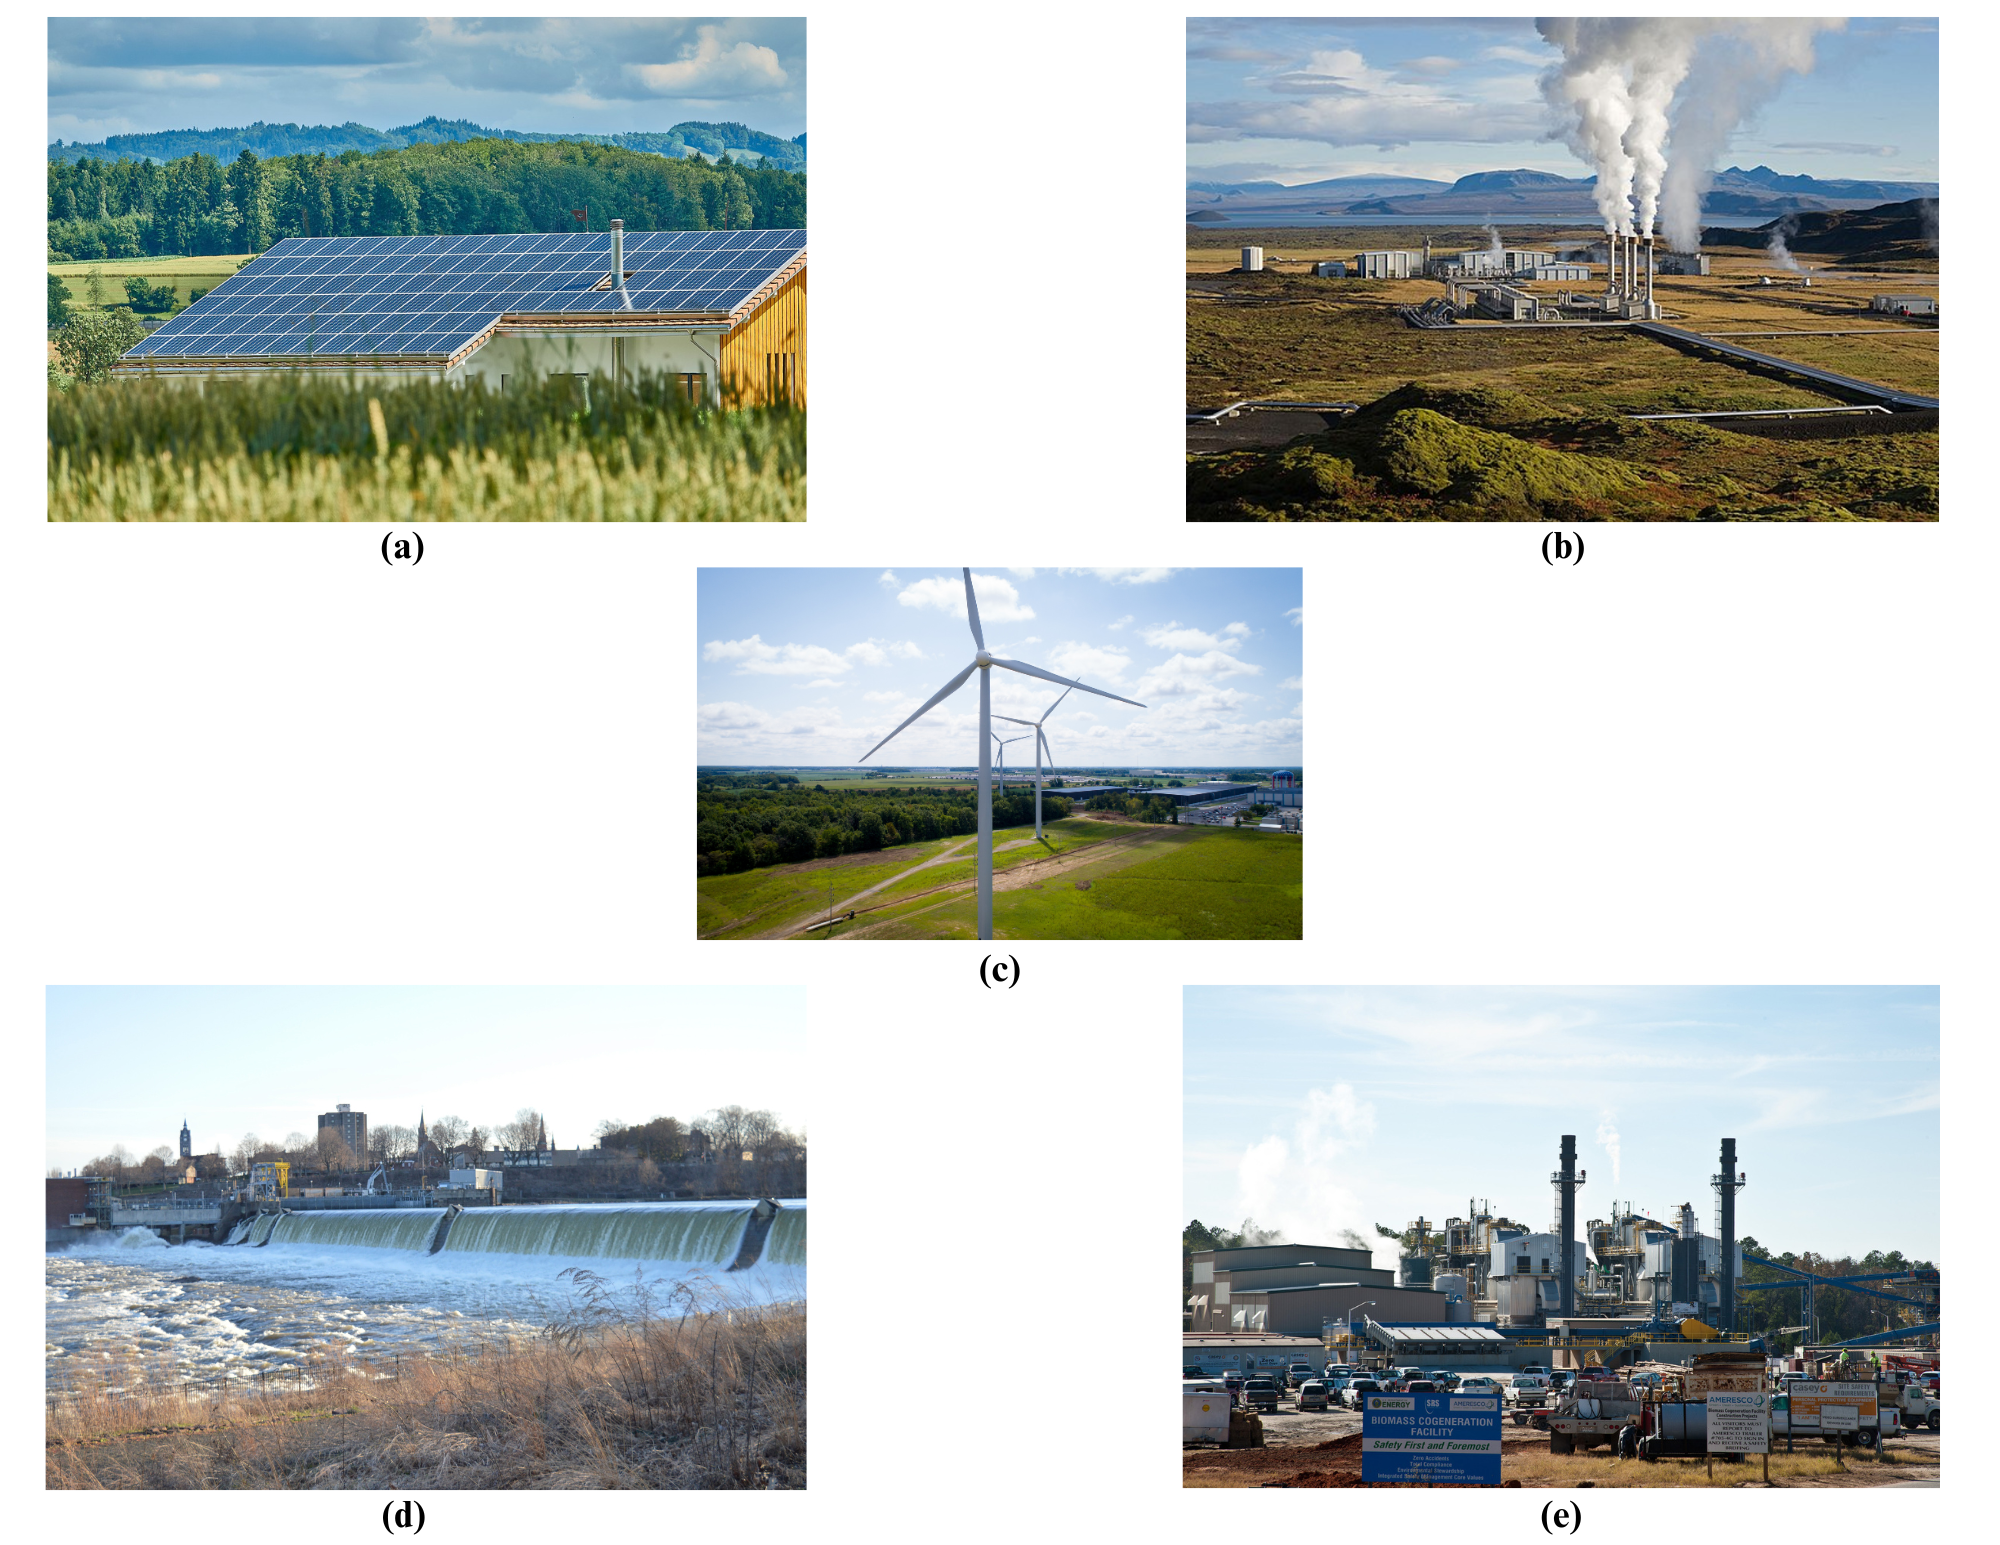 This figure illustrates the renewable energy sources: (a) solar energy, (b) geothermal energy, (c) wind power, (d) hydroelectric energy, and (e) biomass energy.